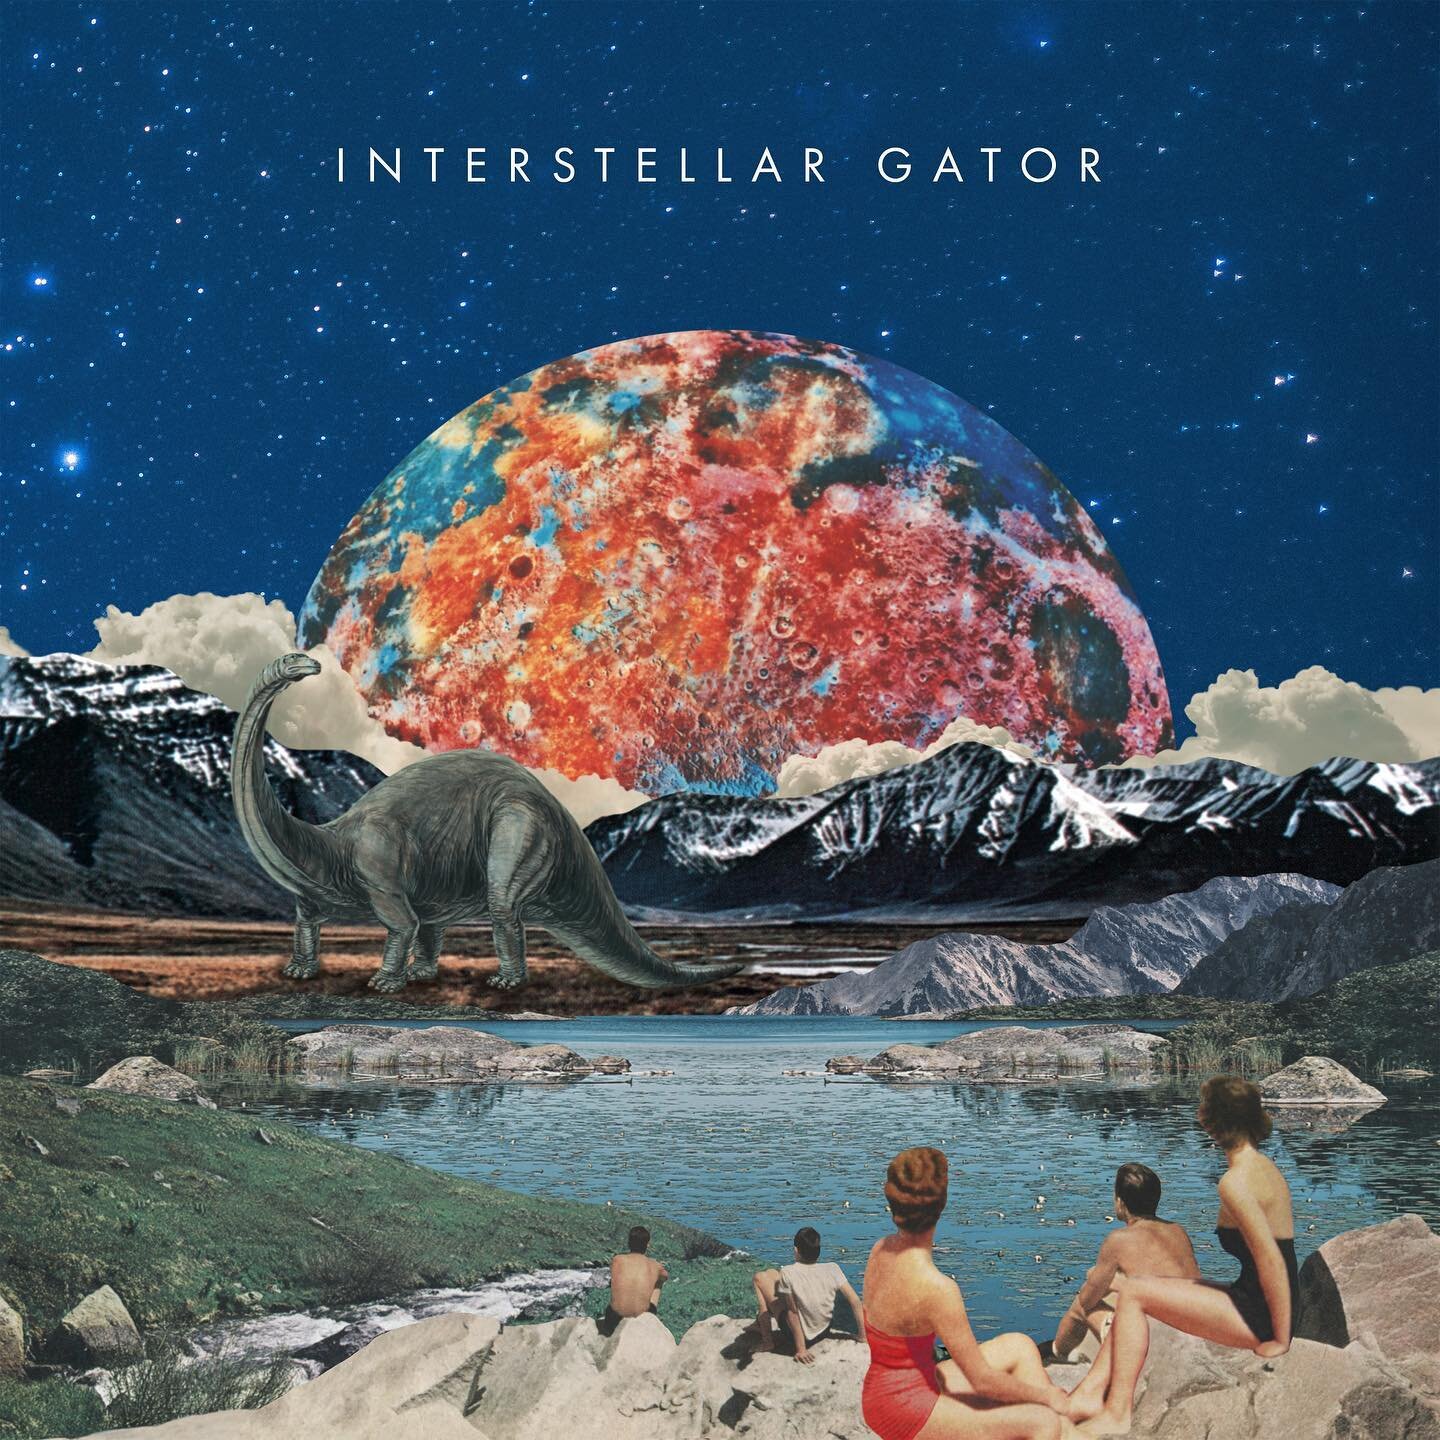 Here it is. Our self-titled debut album &lsquo;Interstellar Gator&rsquo; 🐊